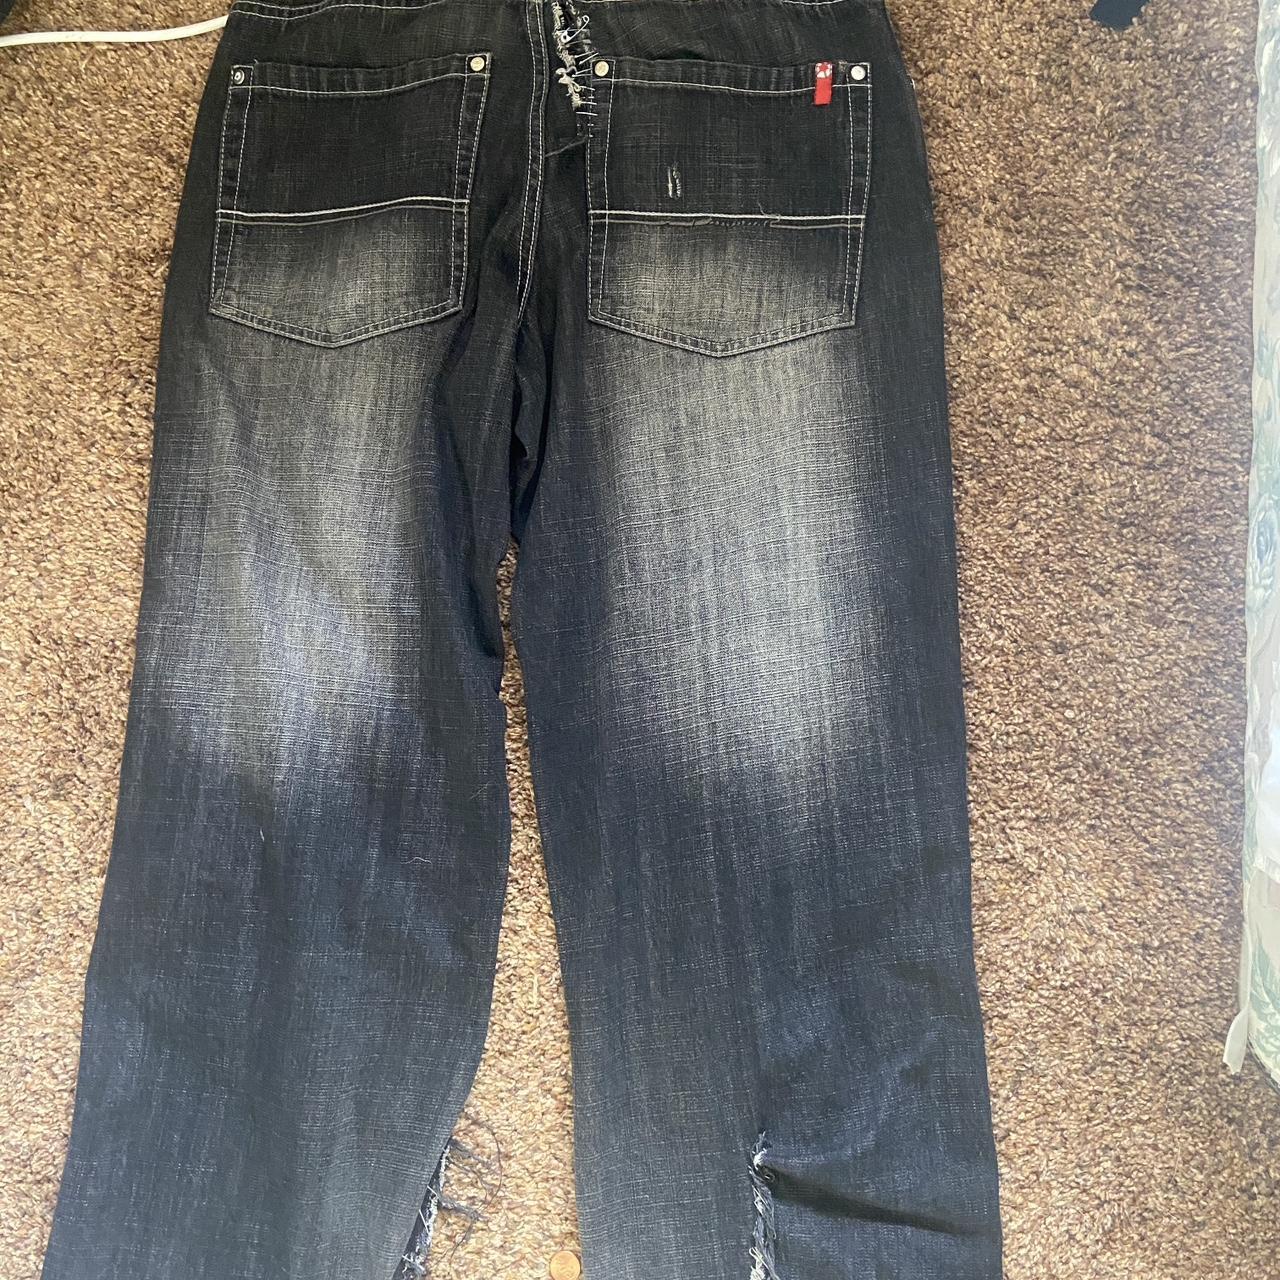 Black south pole jeans, very worn/torn and fixed... - Depop